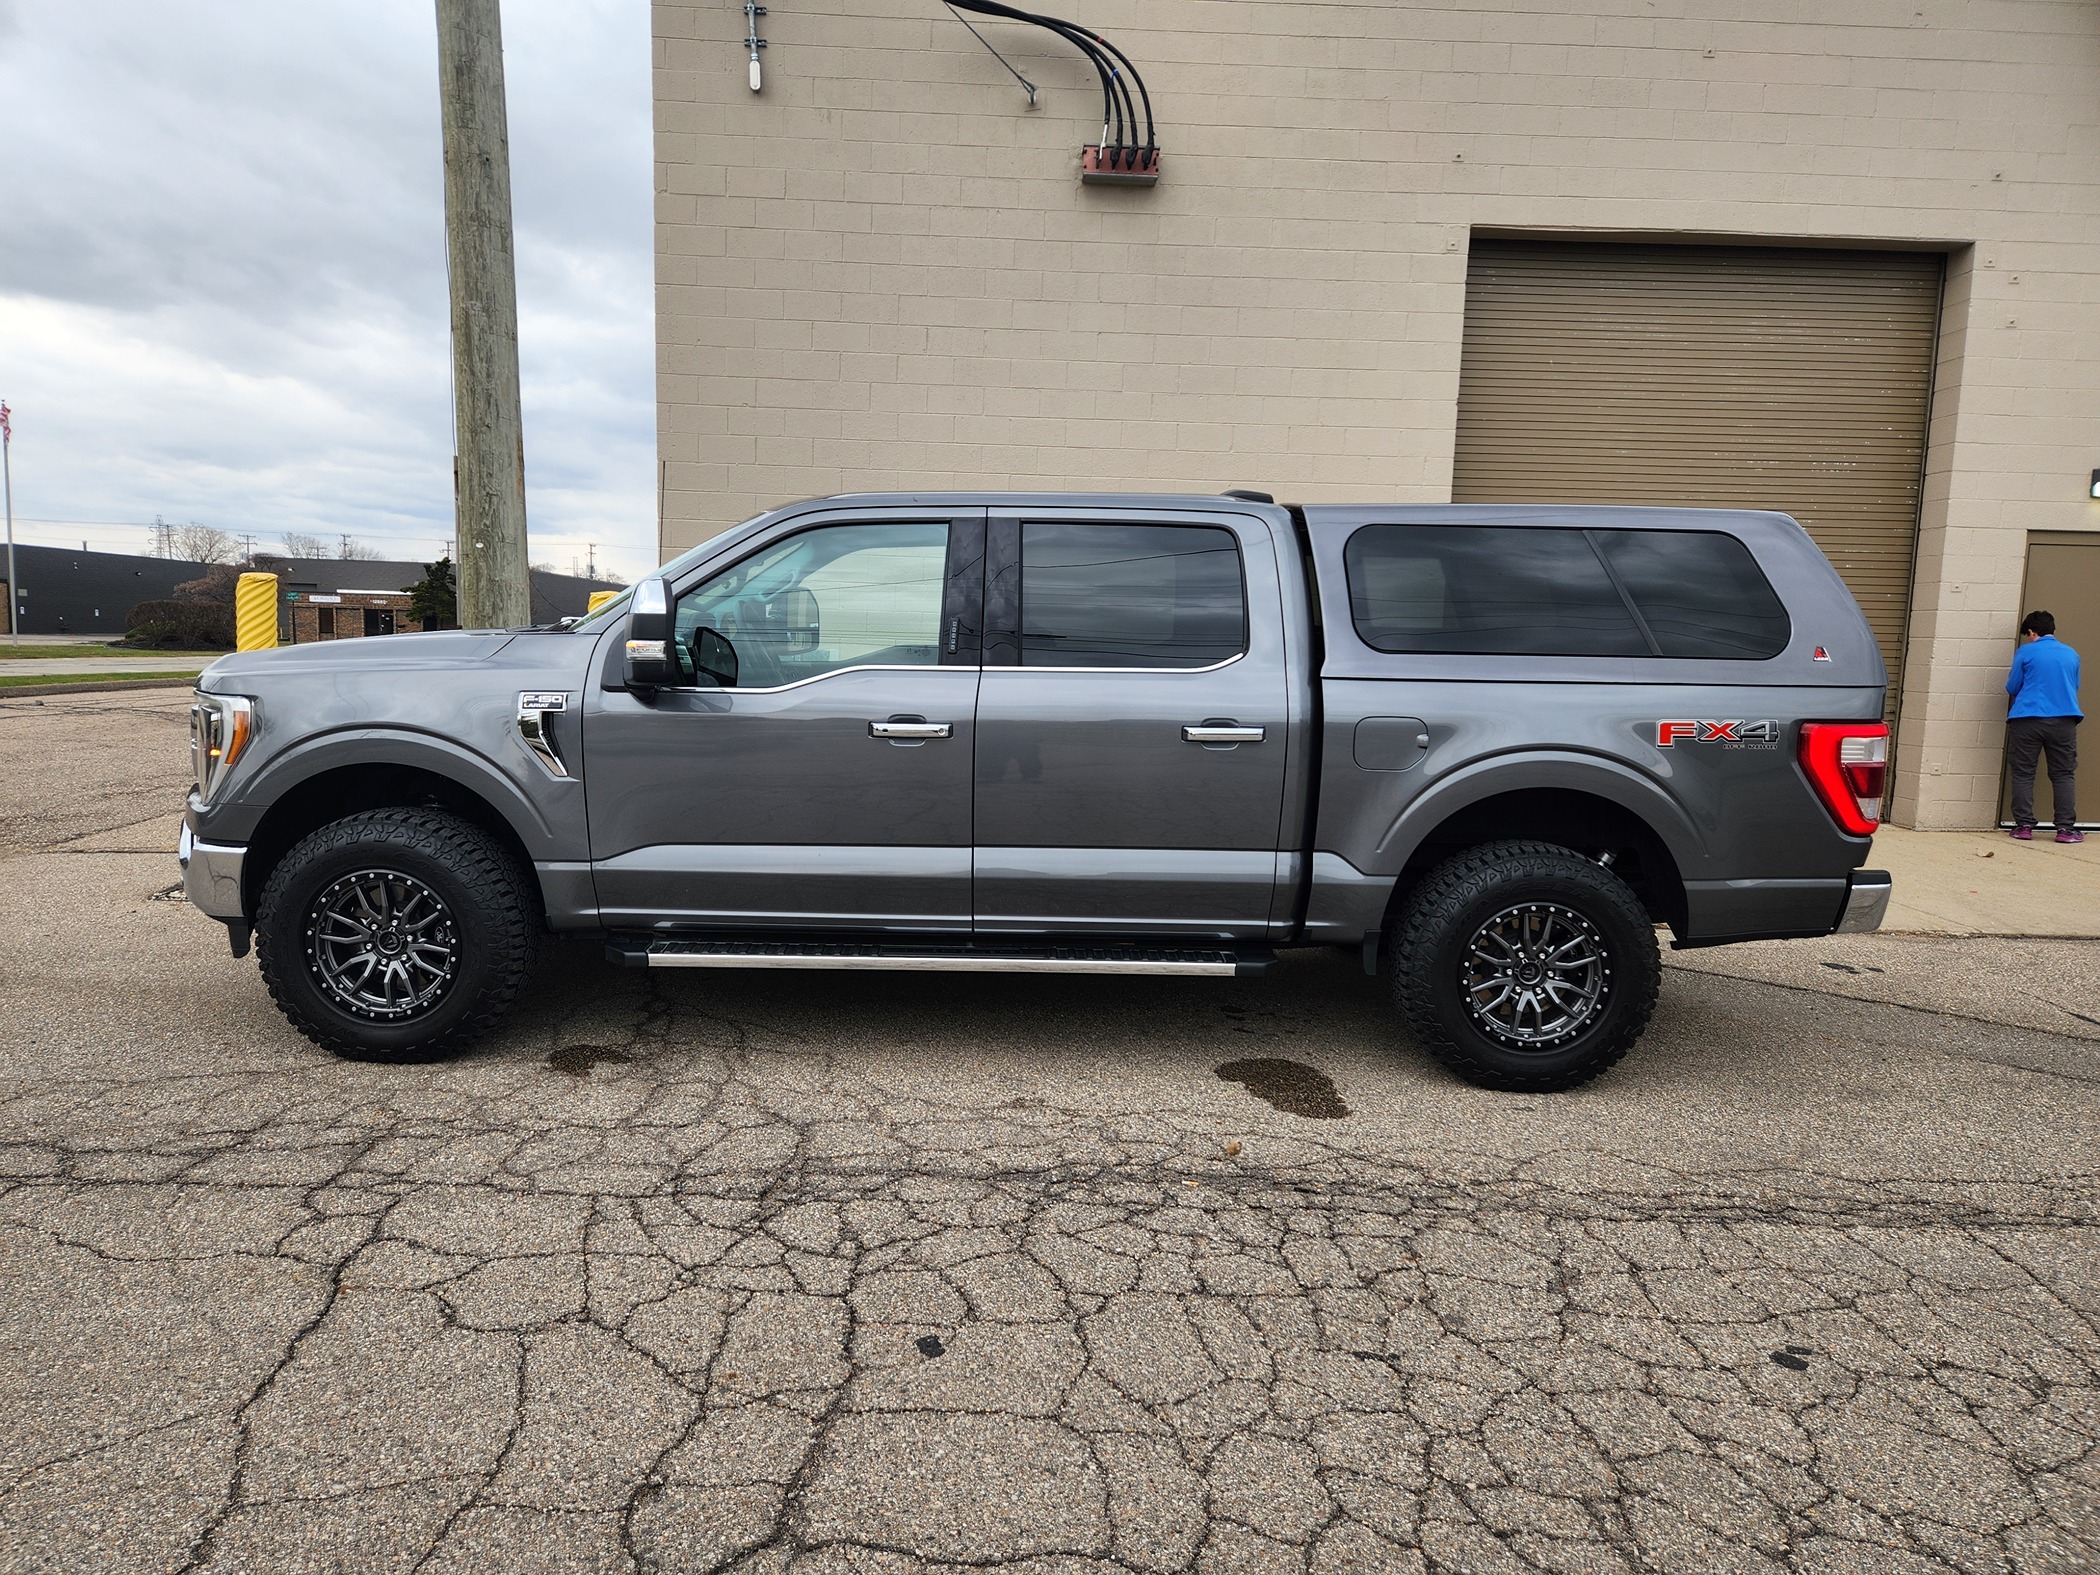 Ford F-150 Leveled or Lifted "Long Bed" 157" Wheel Base Photo Thread 20240316_151533